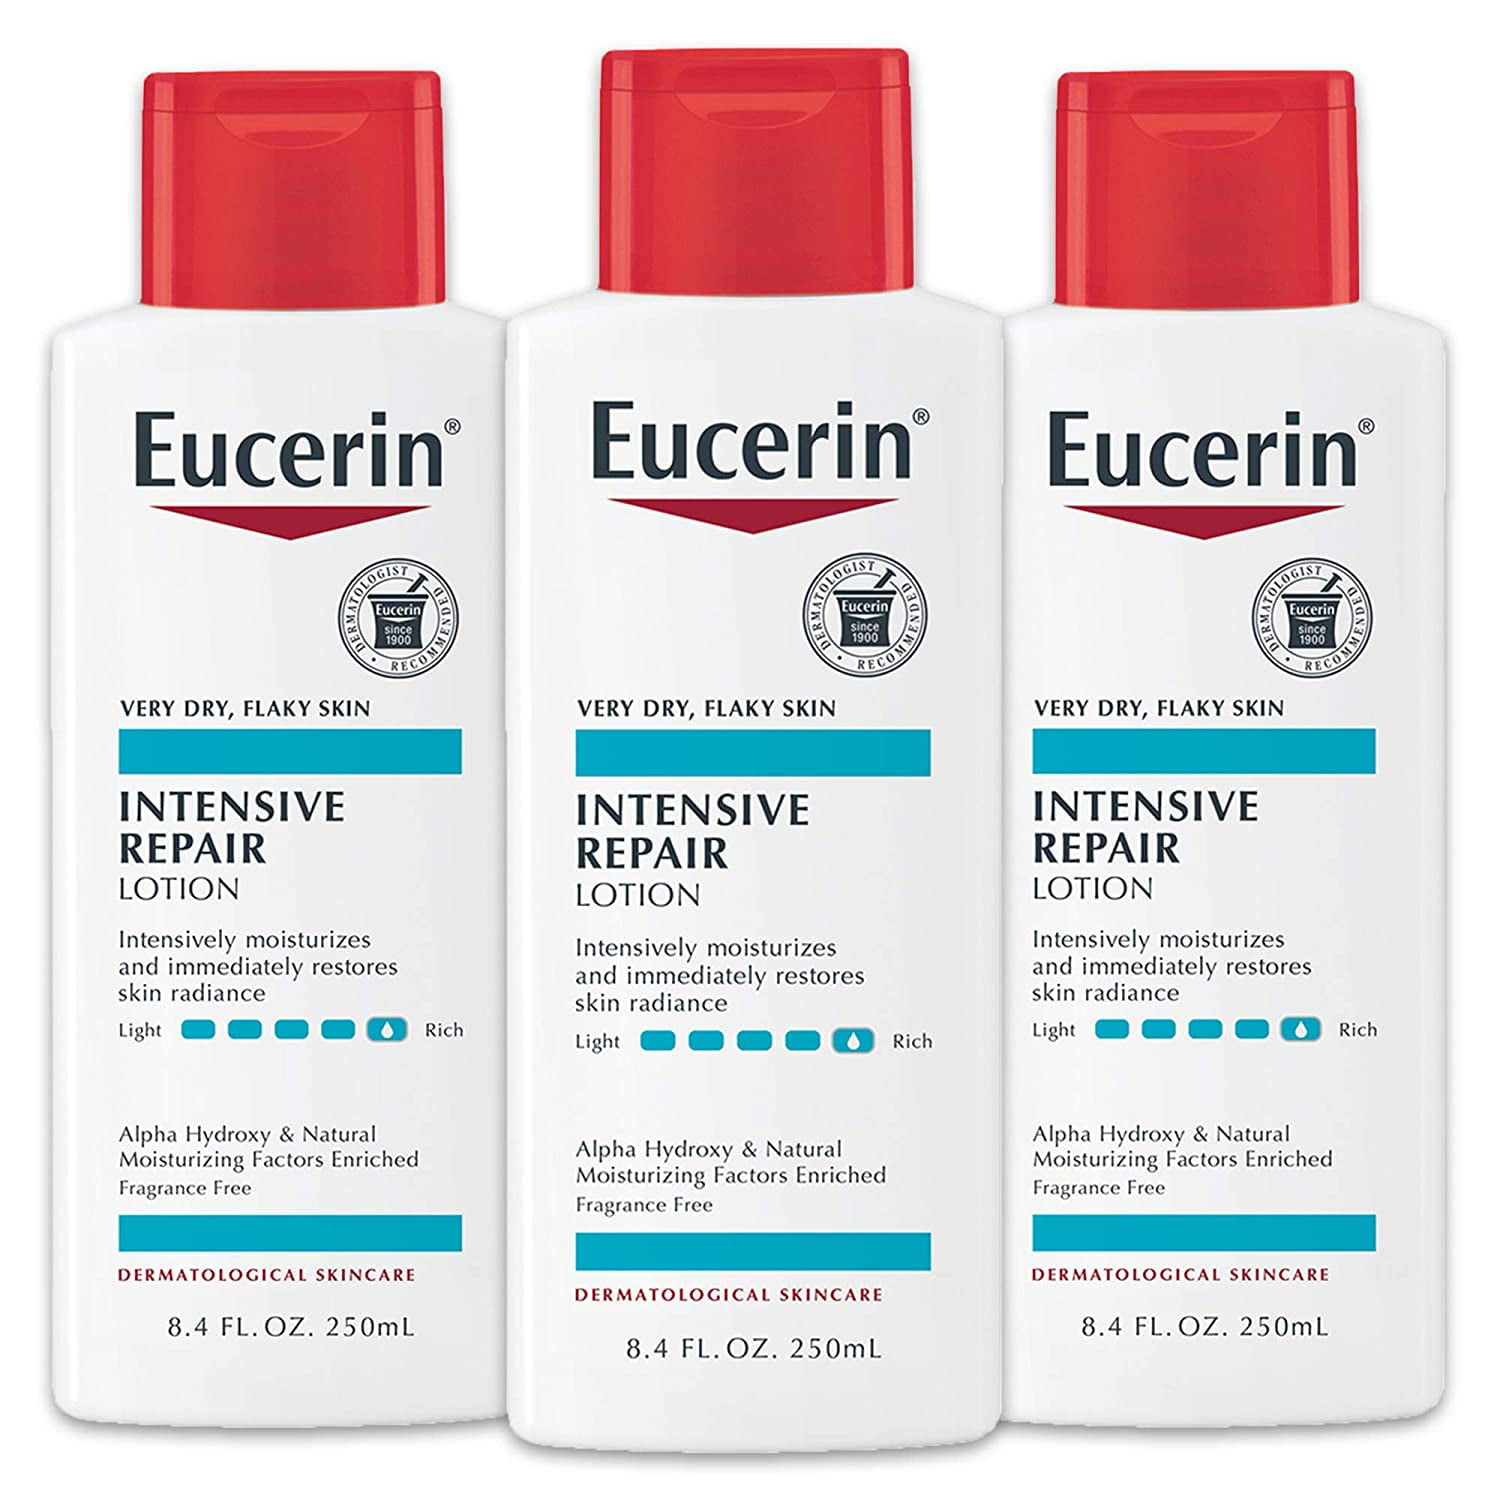 Eucerin Intensive Repair Lotion Lotion for Very Dry, Flaky Skin - 8.4 fl. oz. Bottle (Pack of 3) - Walmart.com